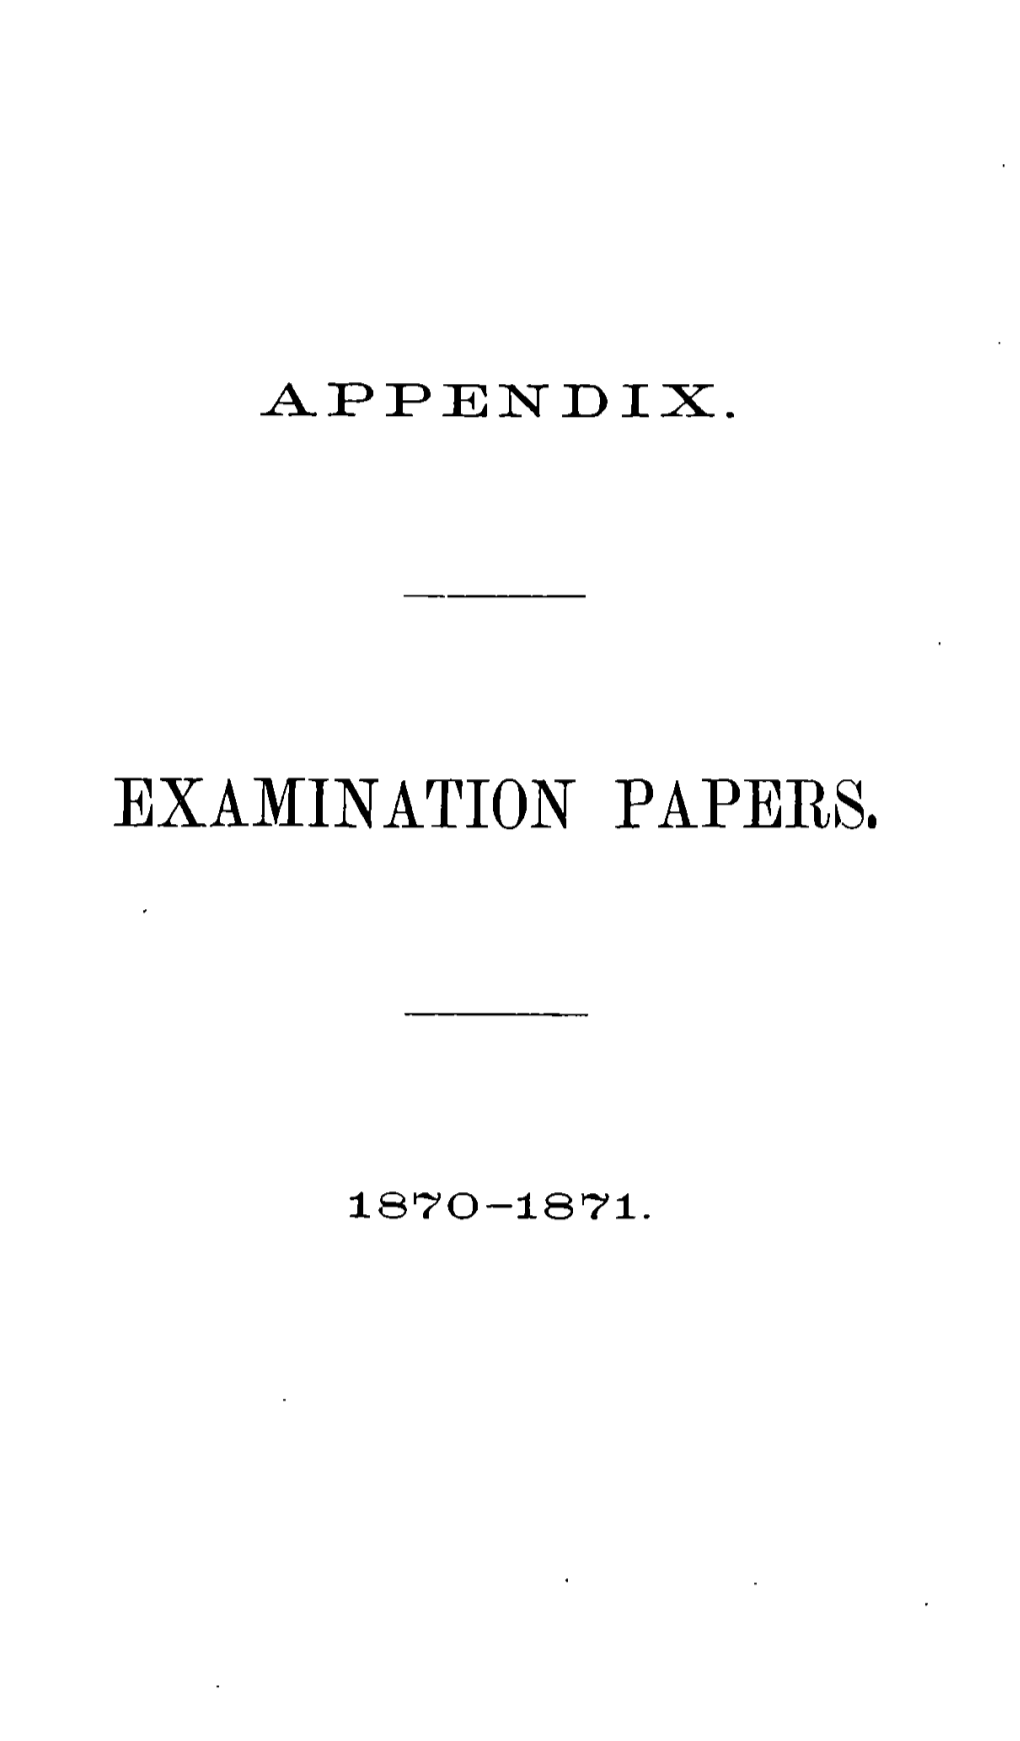 Examination Papees